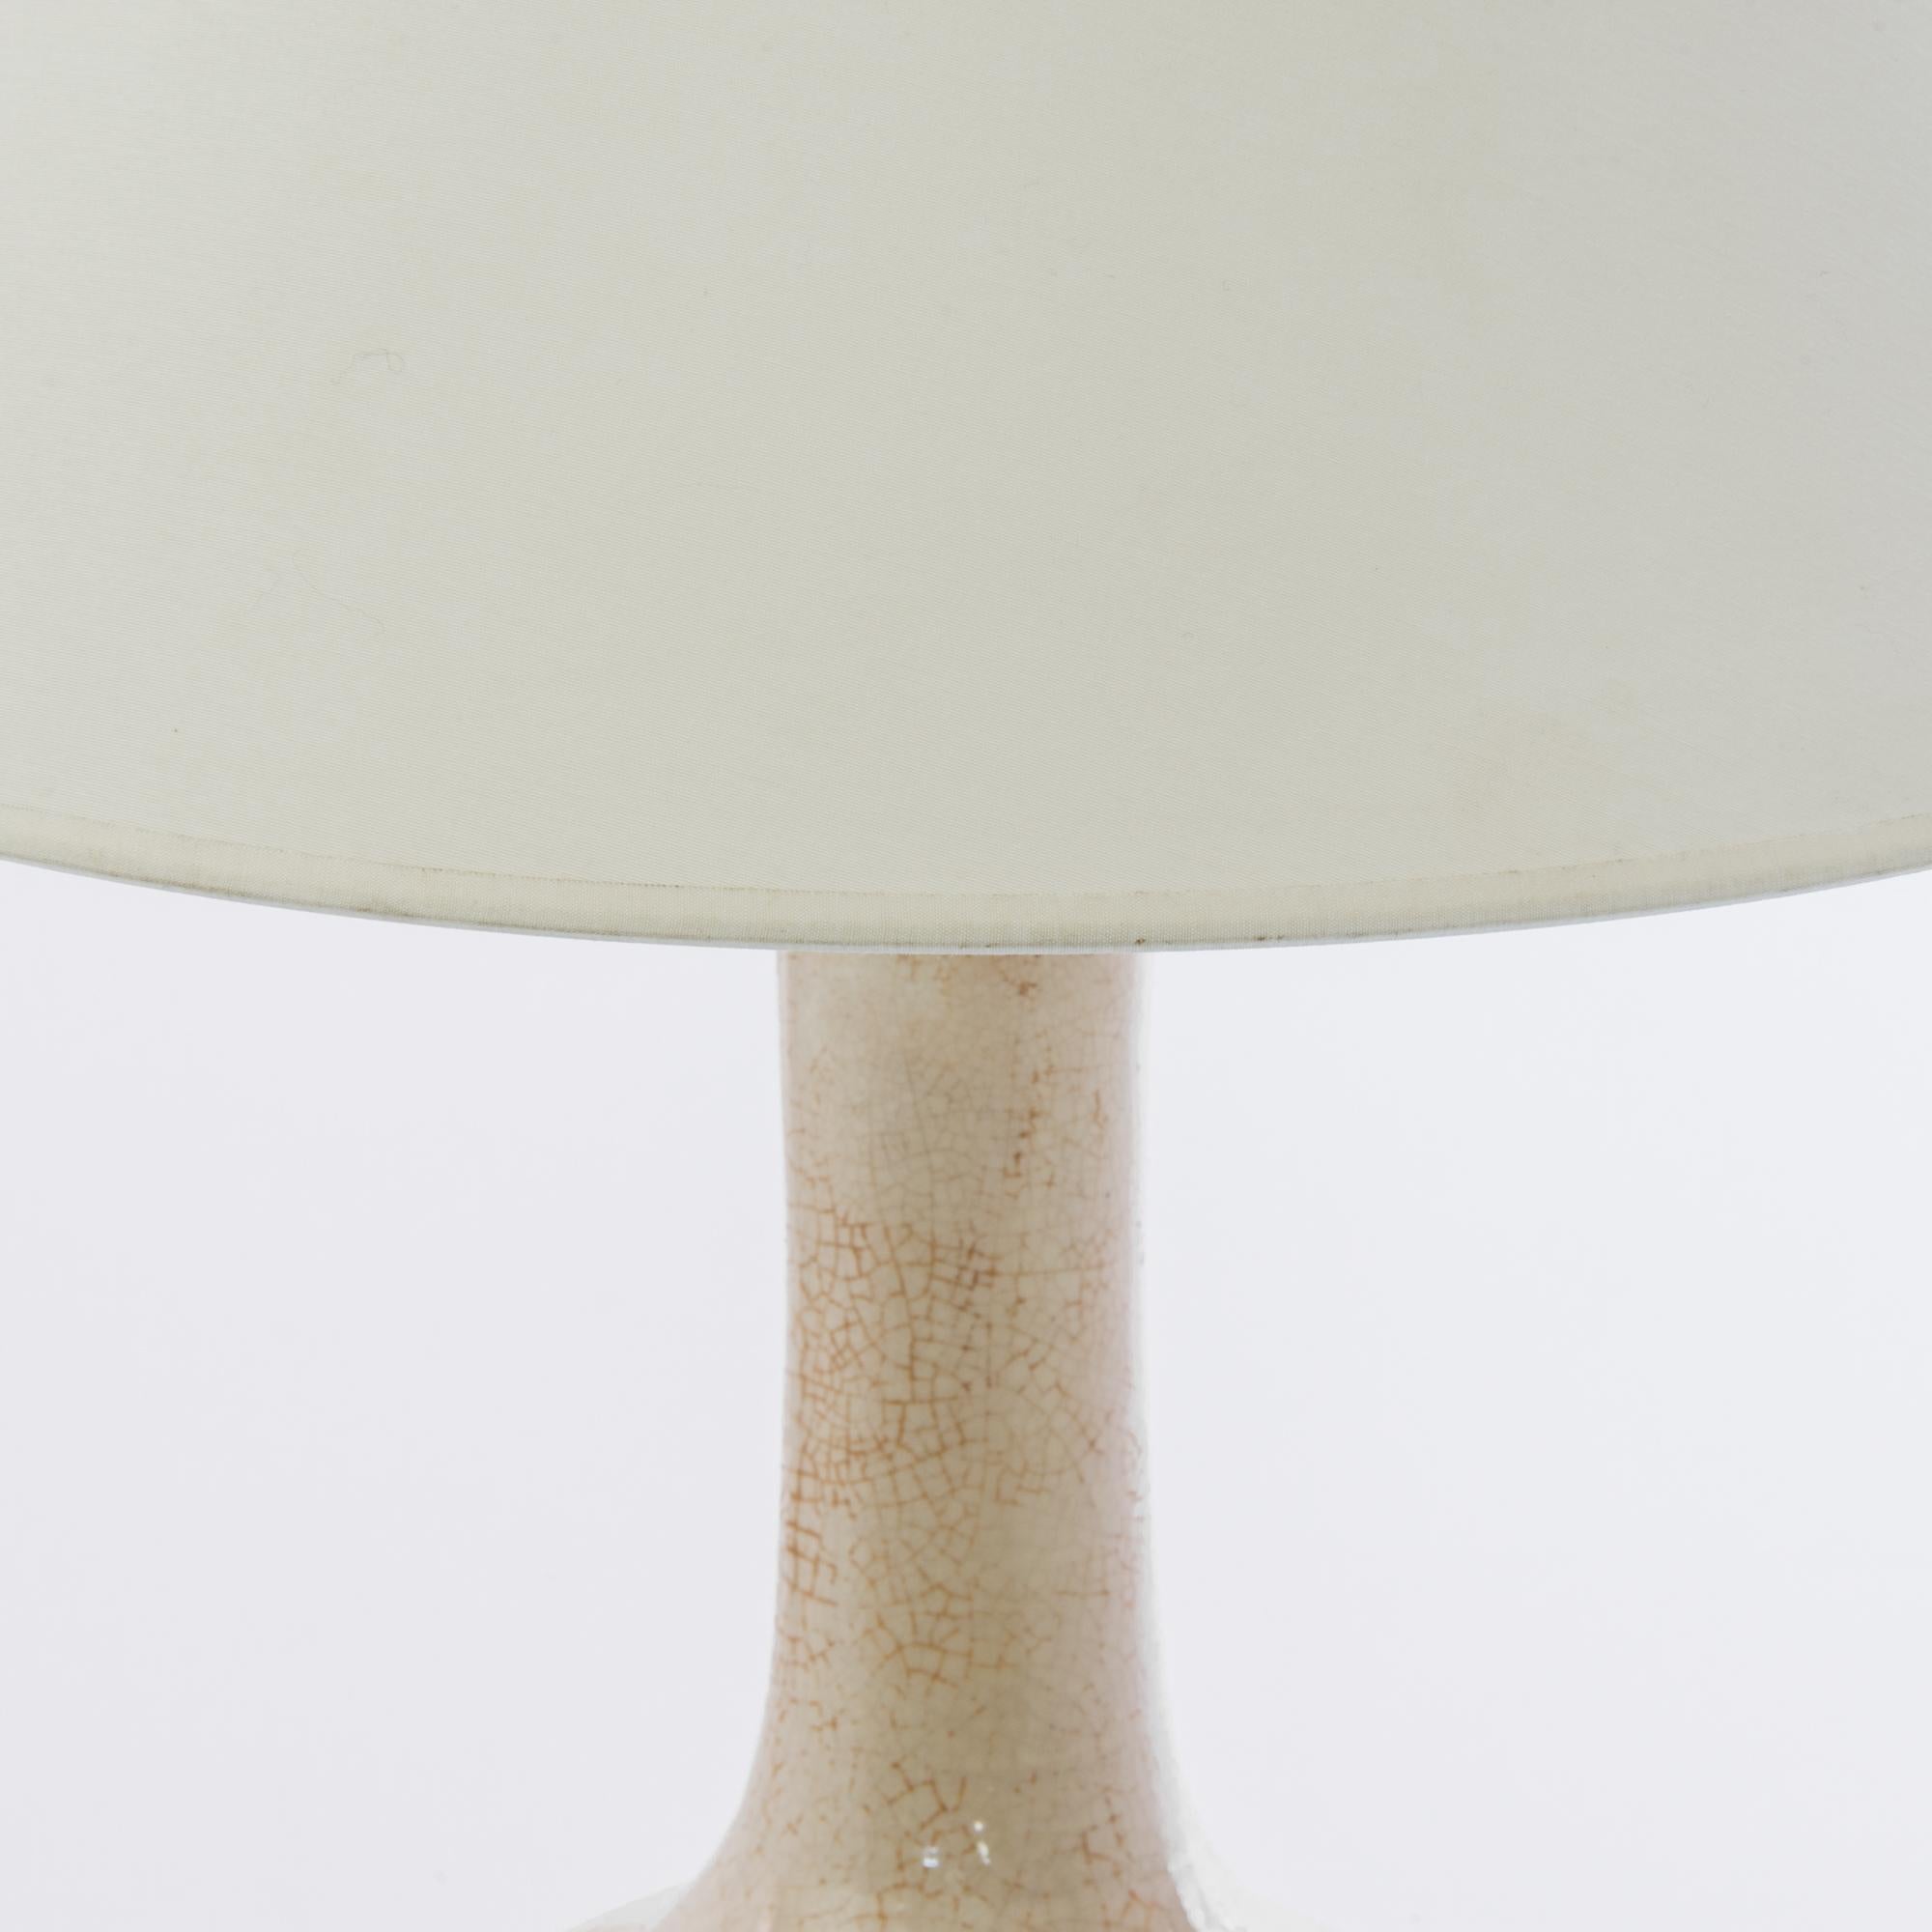 This finely crafted vintage Chinese vase has been fitted with an adjustable brass fixture and E26 lighting socket. Textured glazes, attractive colors and clean modern forms make this a great fit for neutral contemporary interiors. 29.1